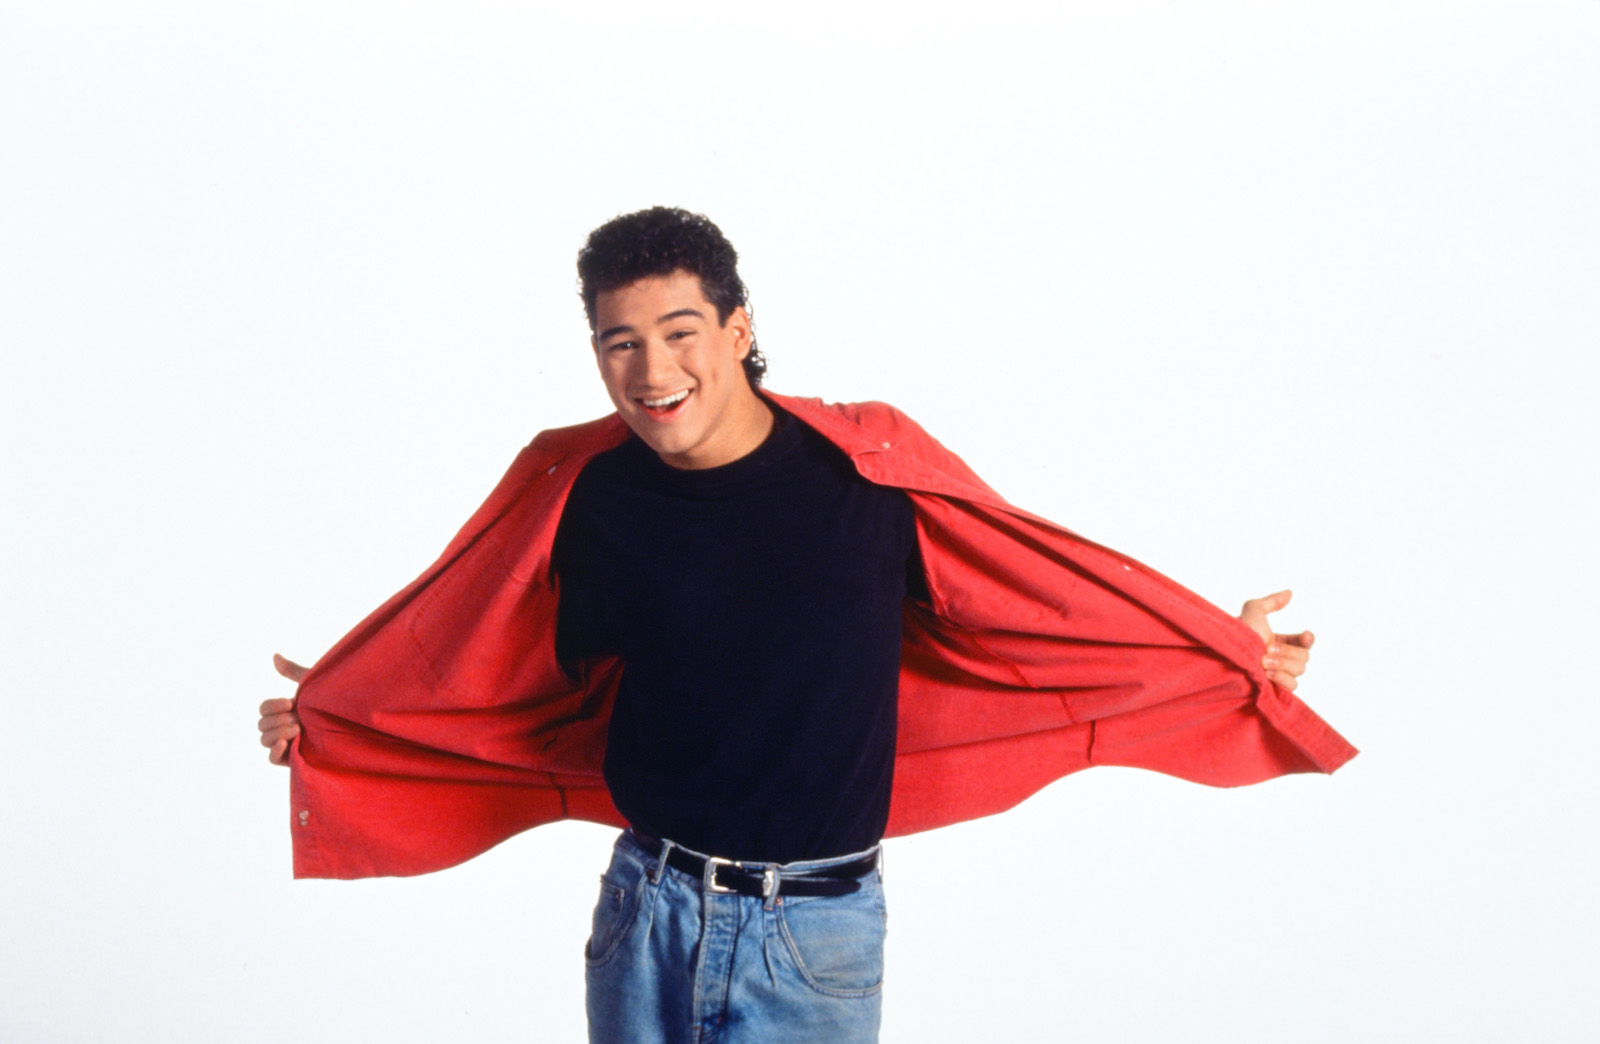 Mario Lopez from 'Saved by the Bell' smiles and holds his shirt open